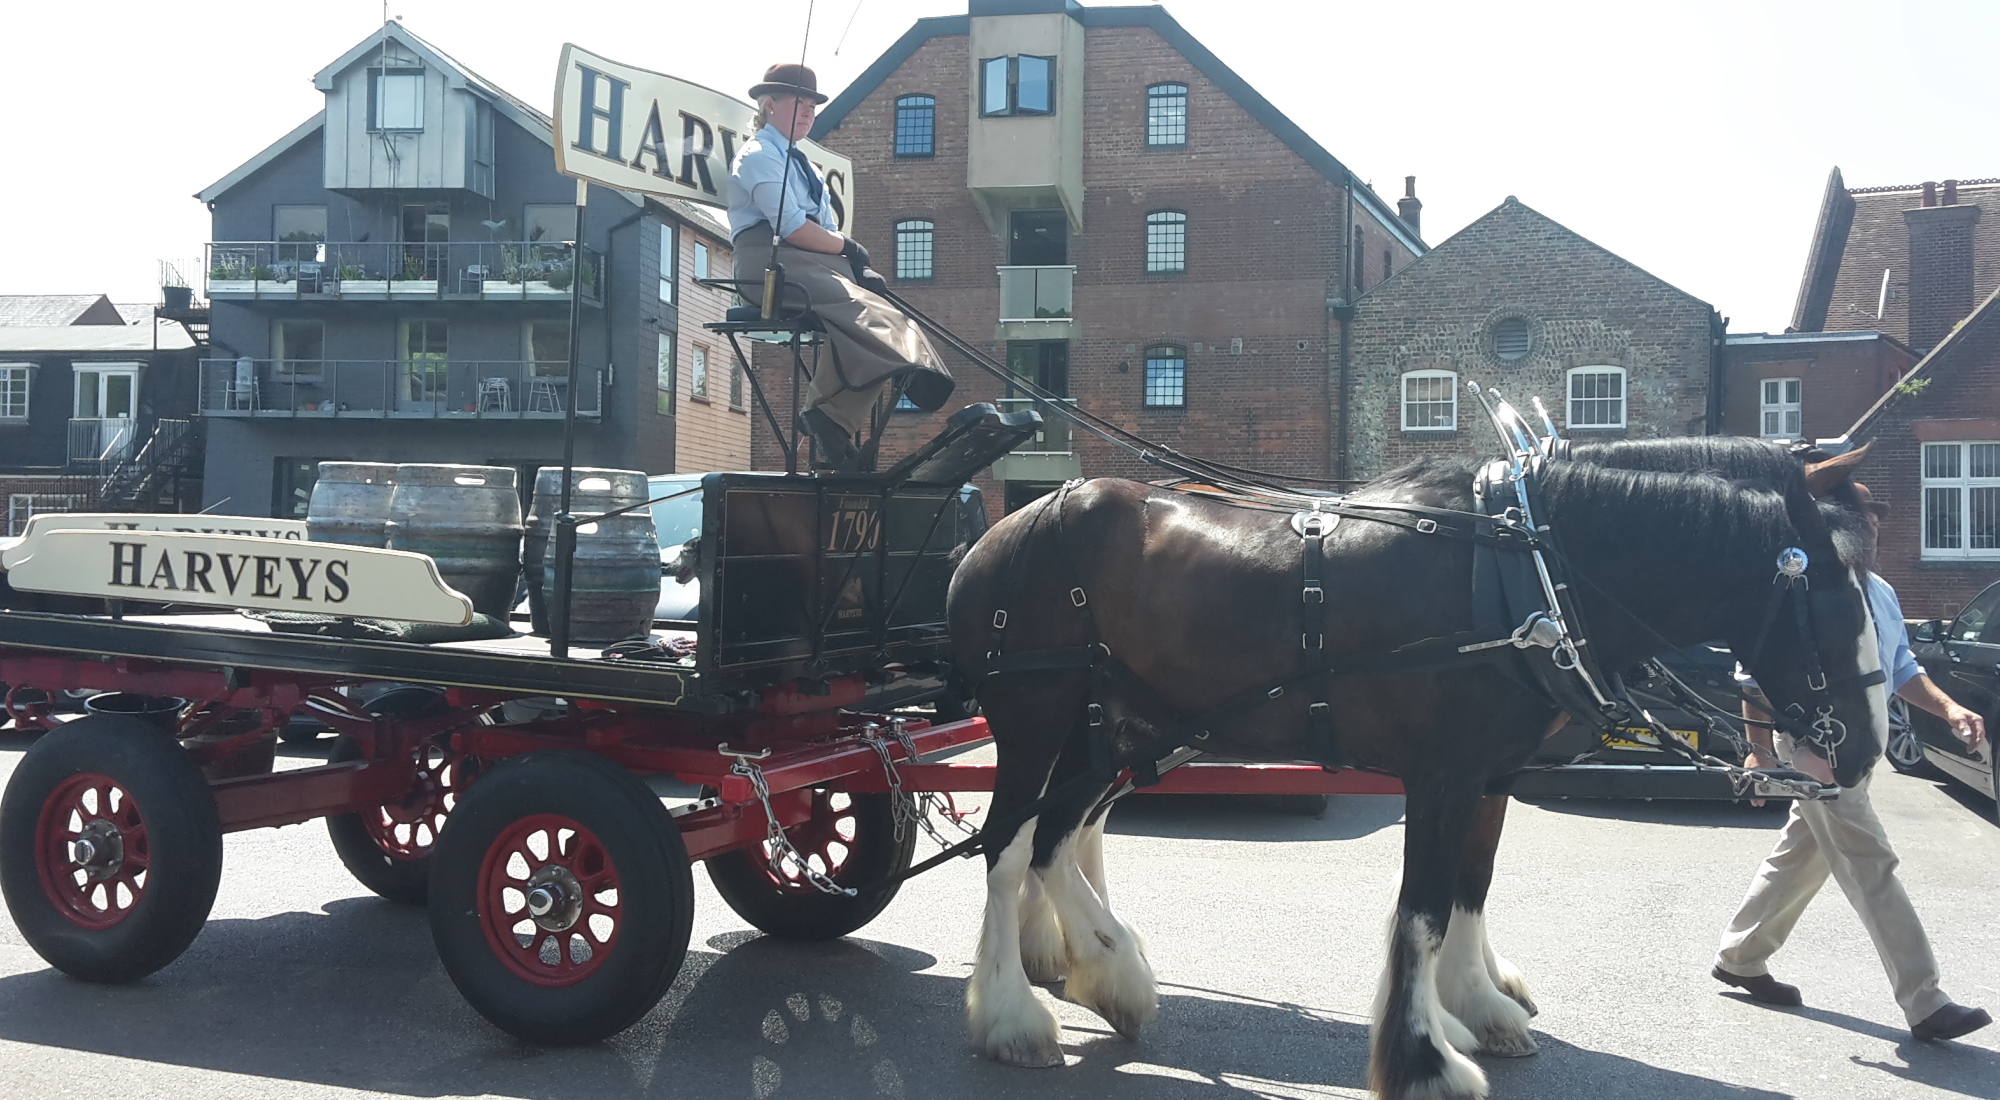 Dray horse pulling a cart, in the town of Lewes